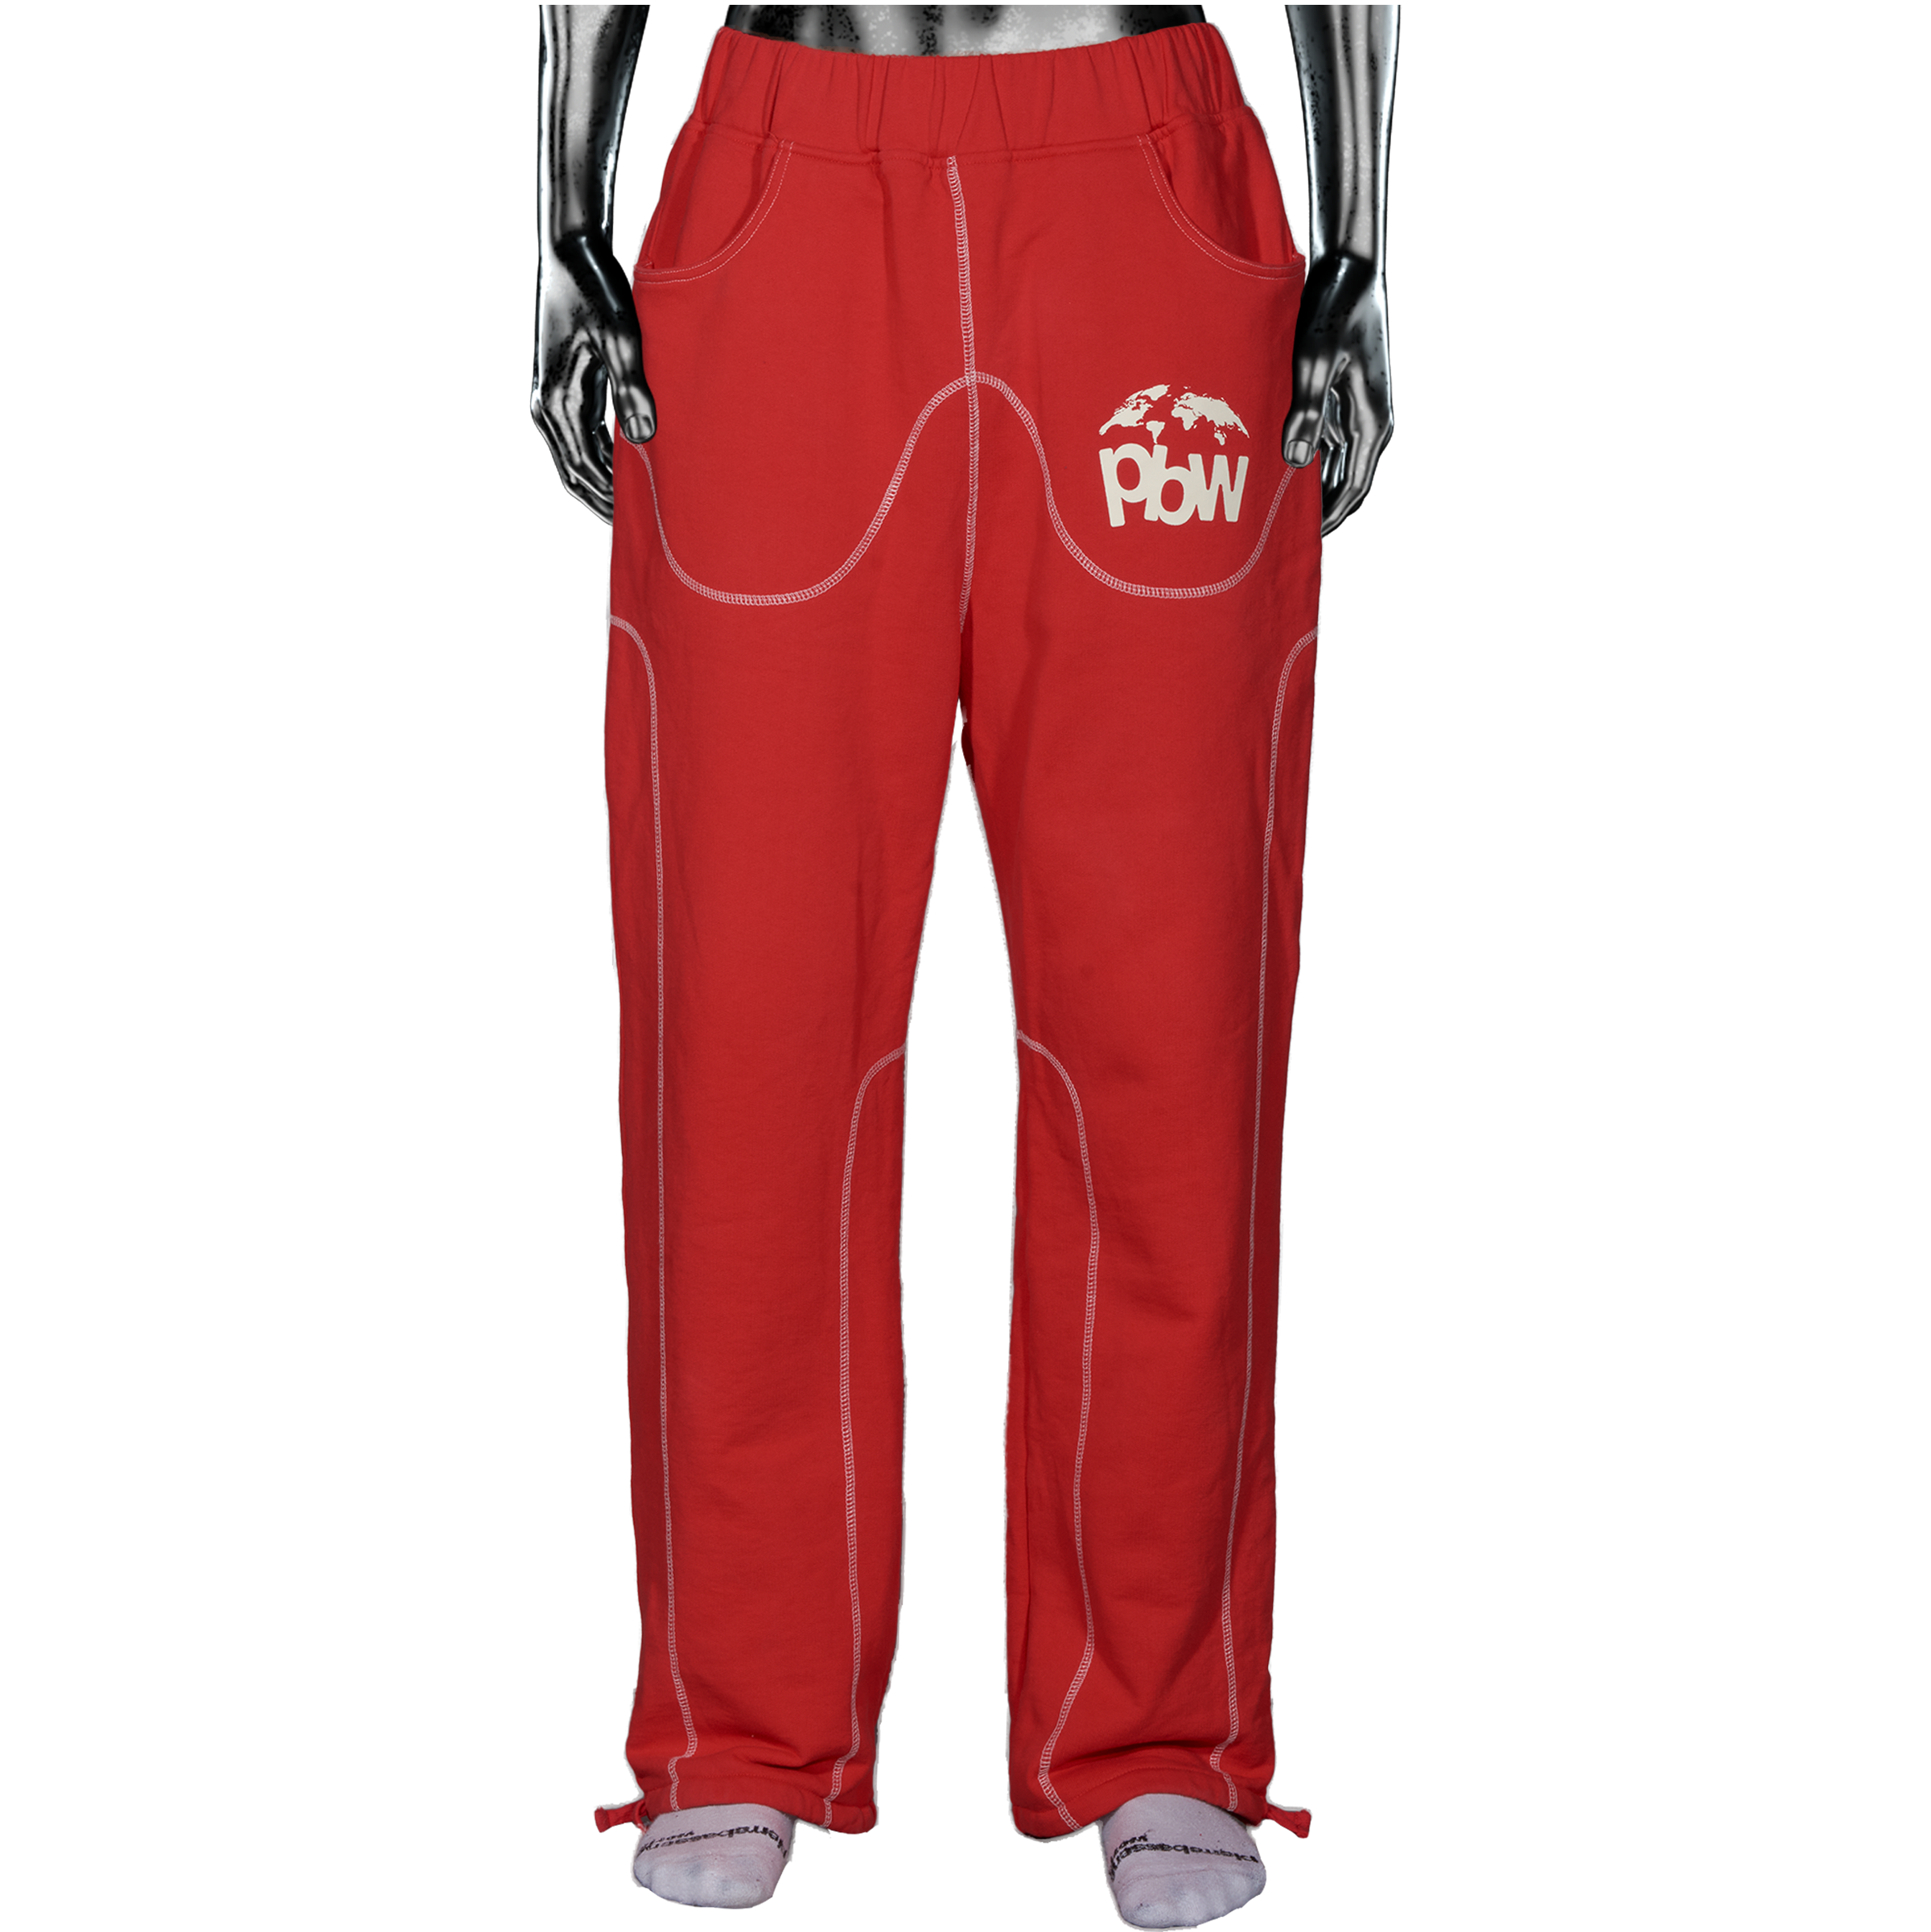 PBW Joggers℗ - Red